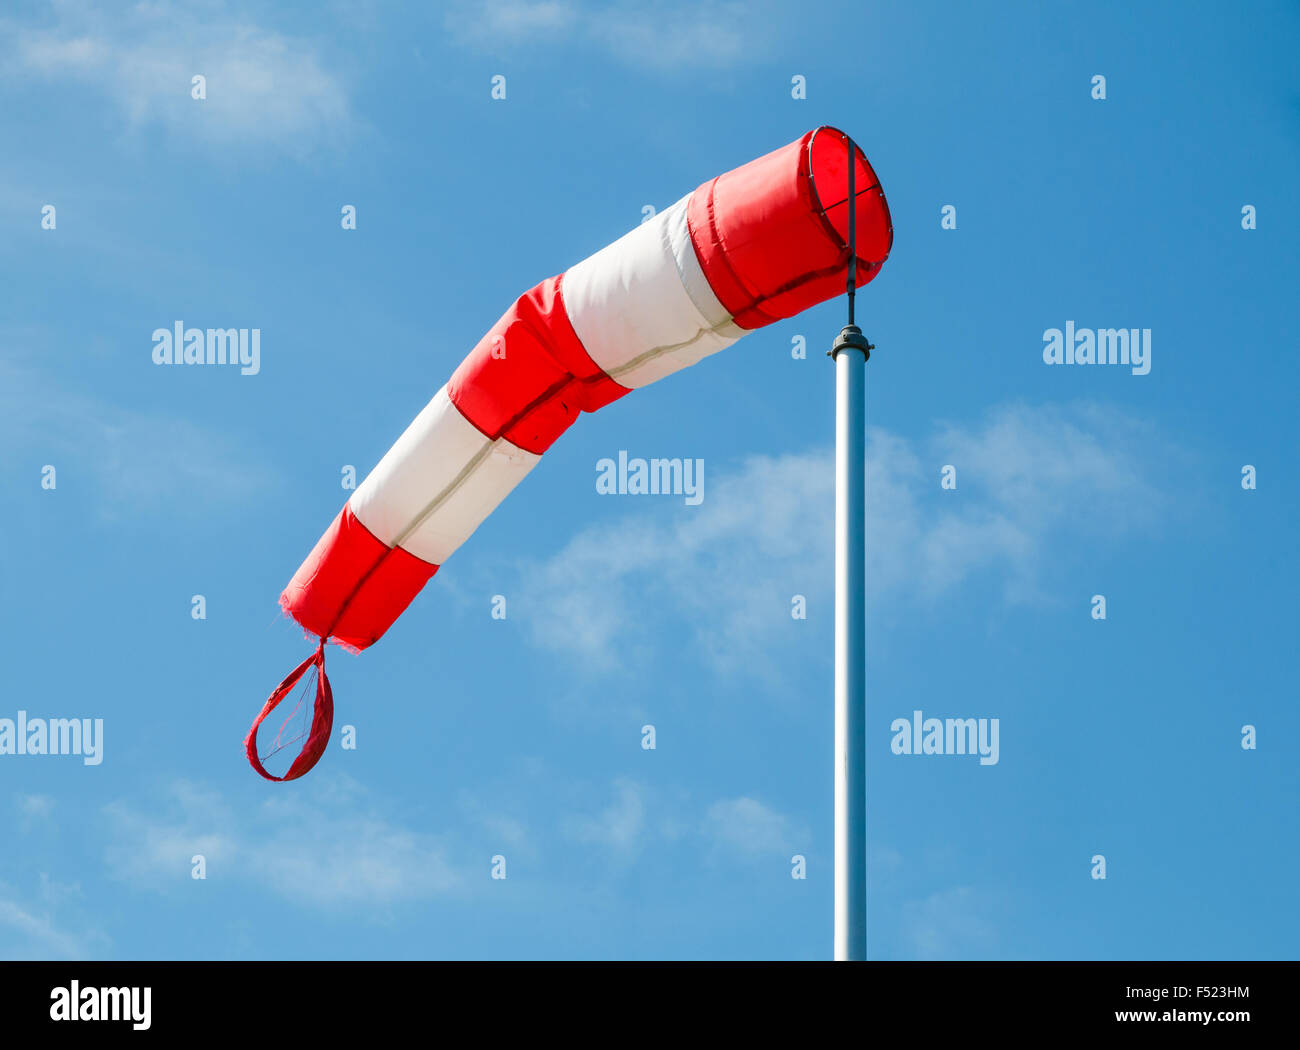 Frayed windsock in moderate wind against blue sky with few clouds Stock Photo